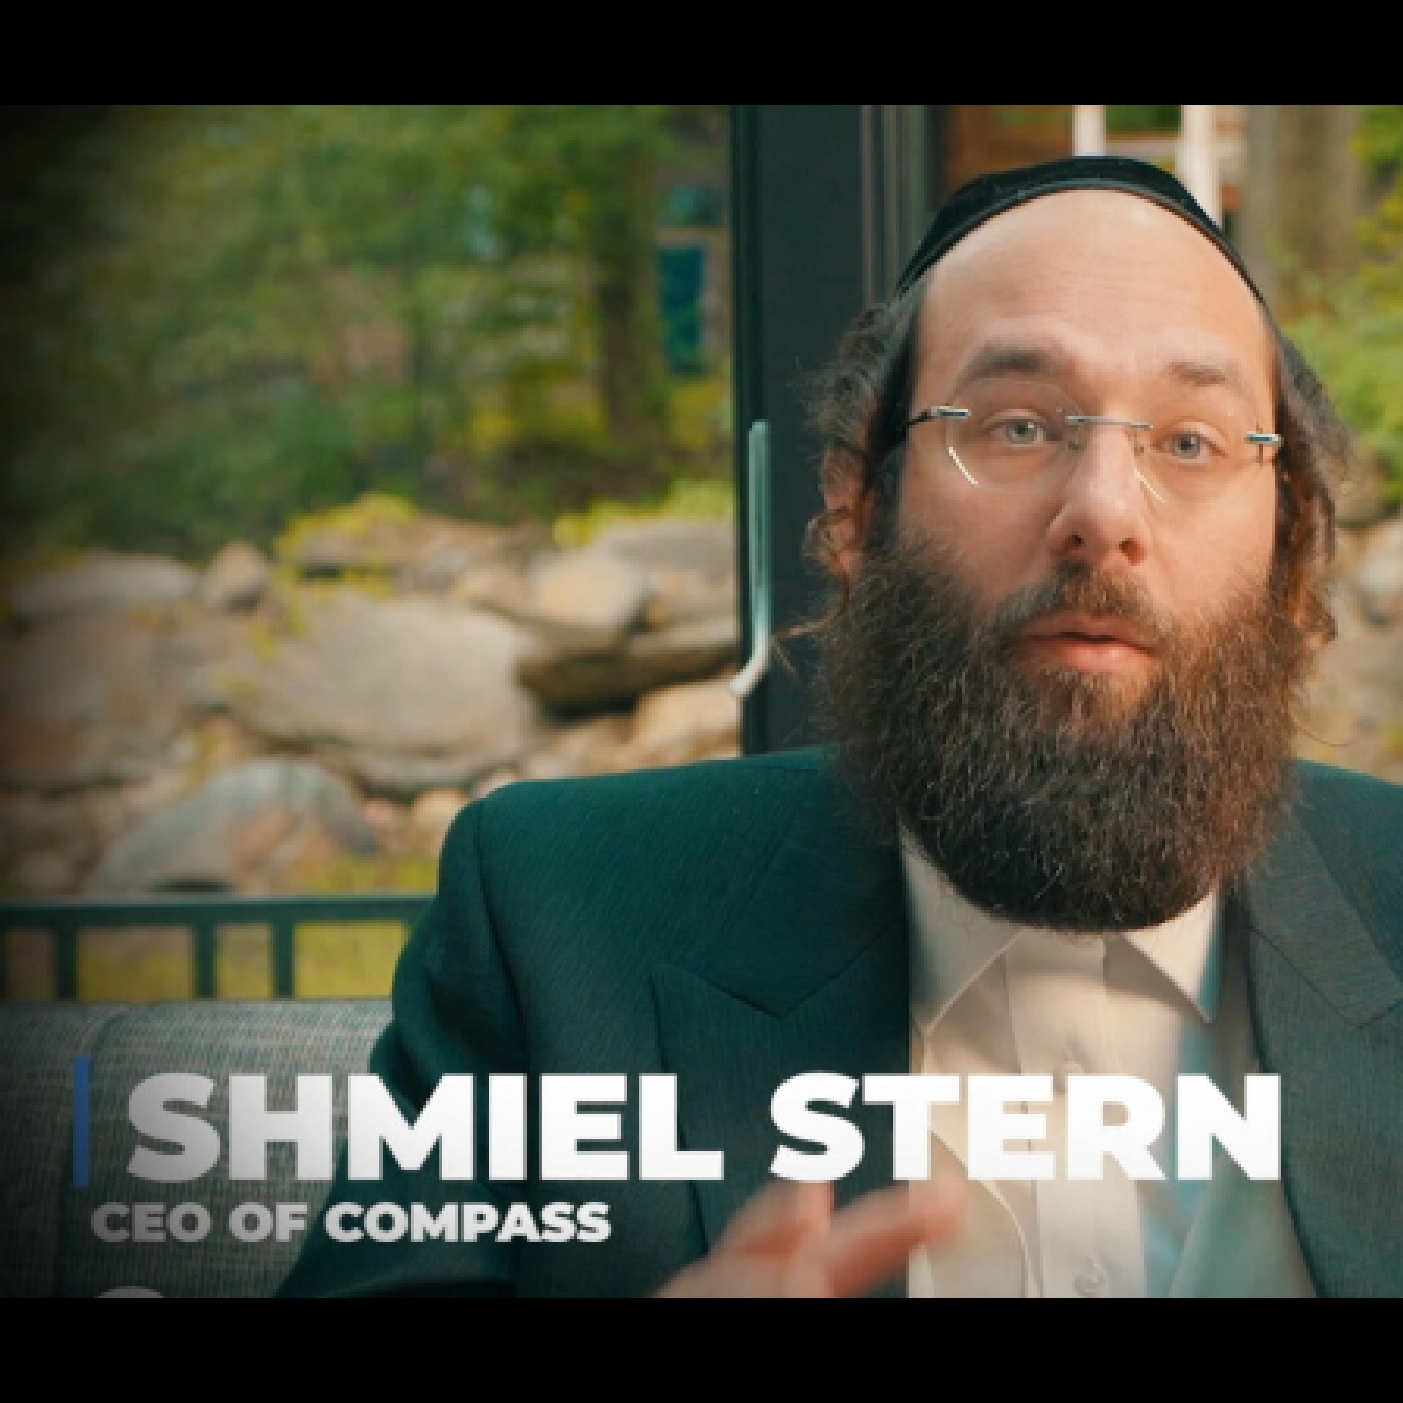 Talkline With Zev Brenner With Shmiel Stern of JBOSS Summit on The Business of Jewish Business